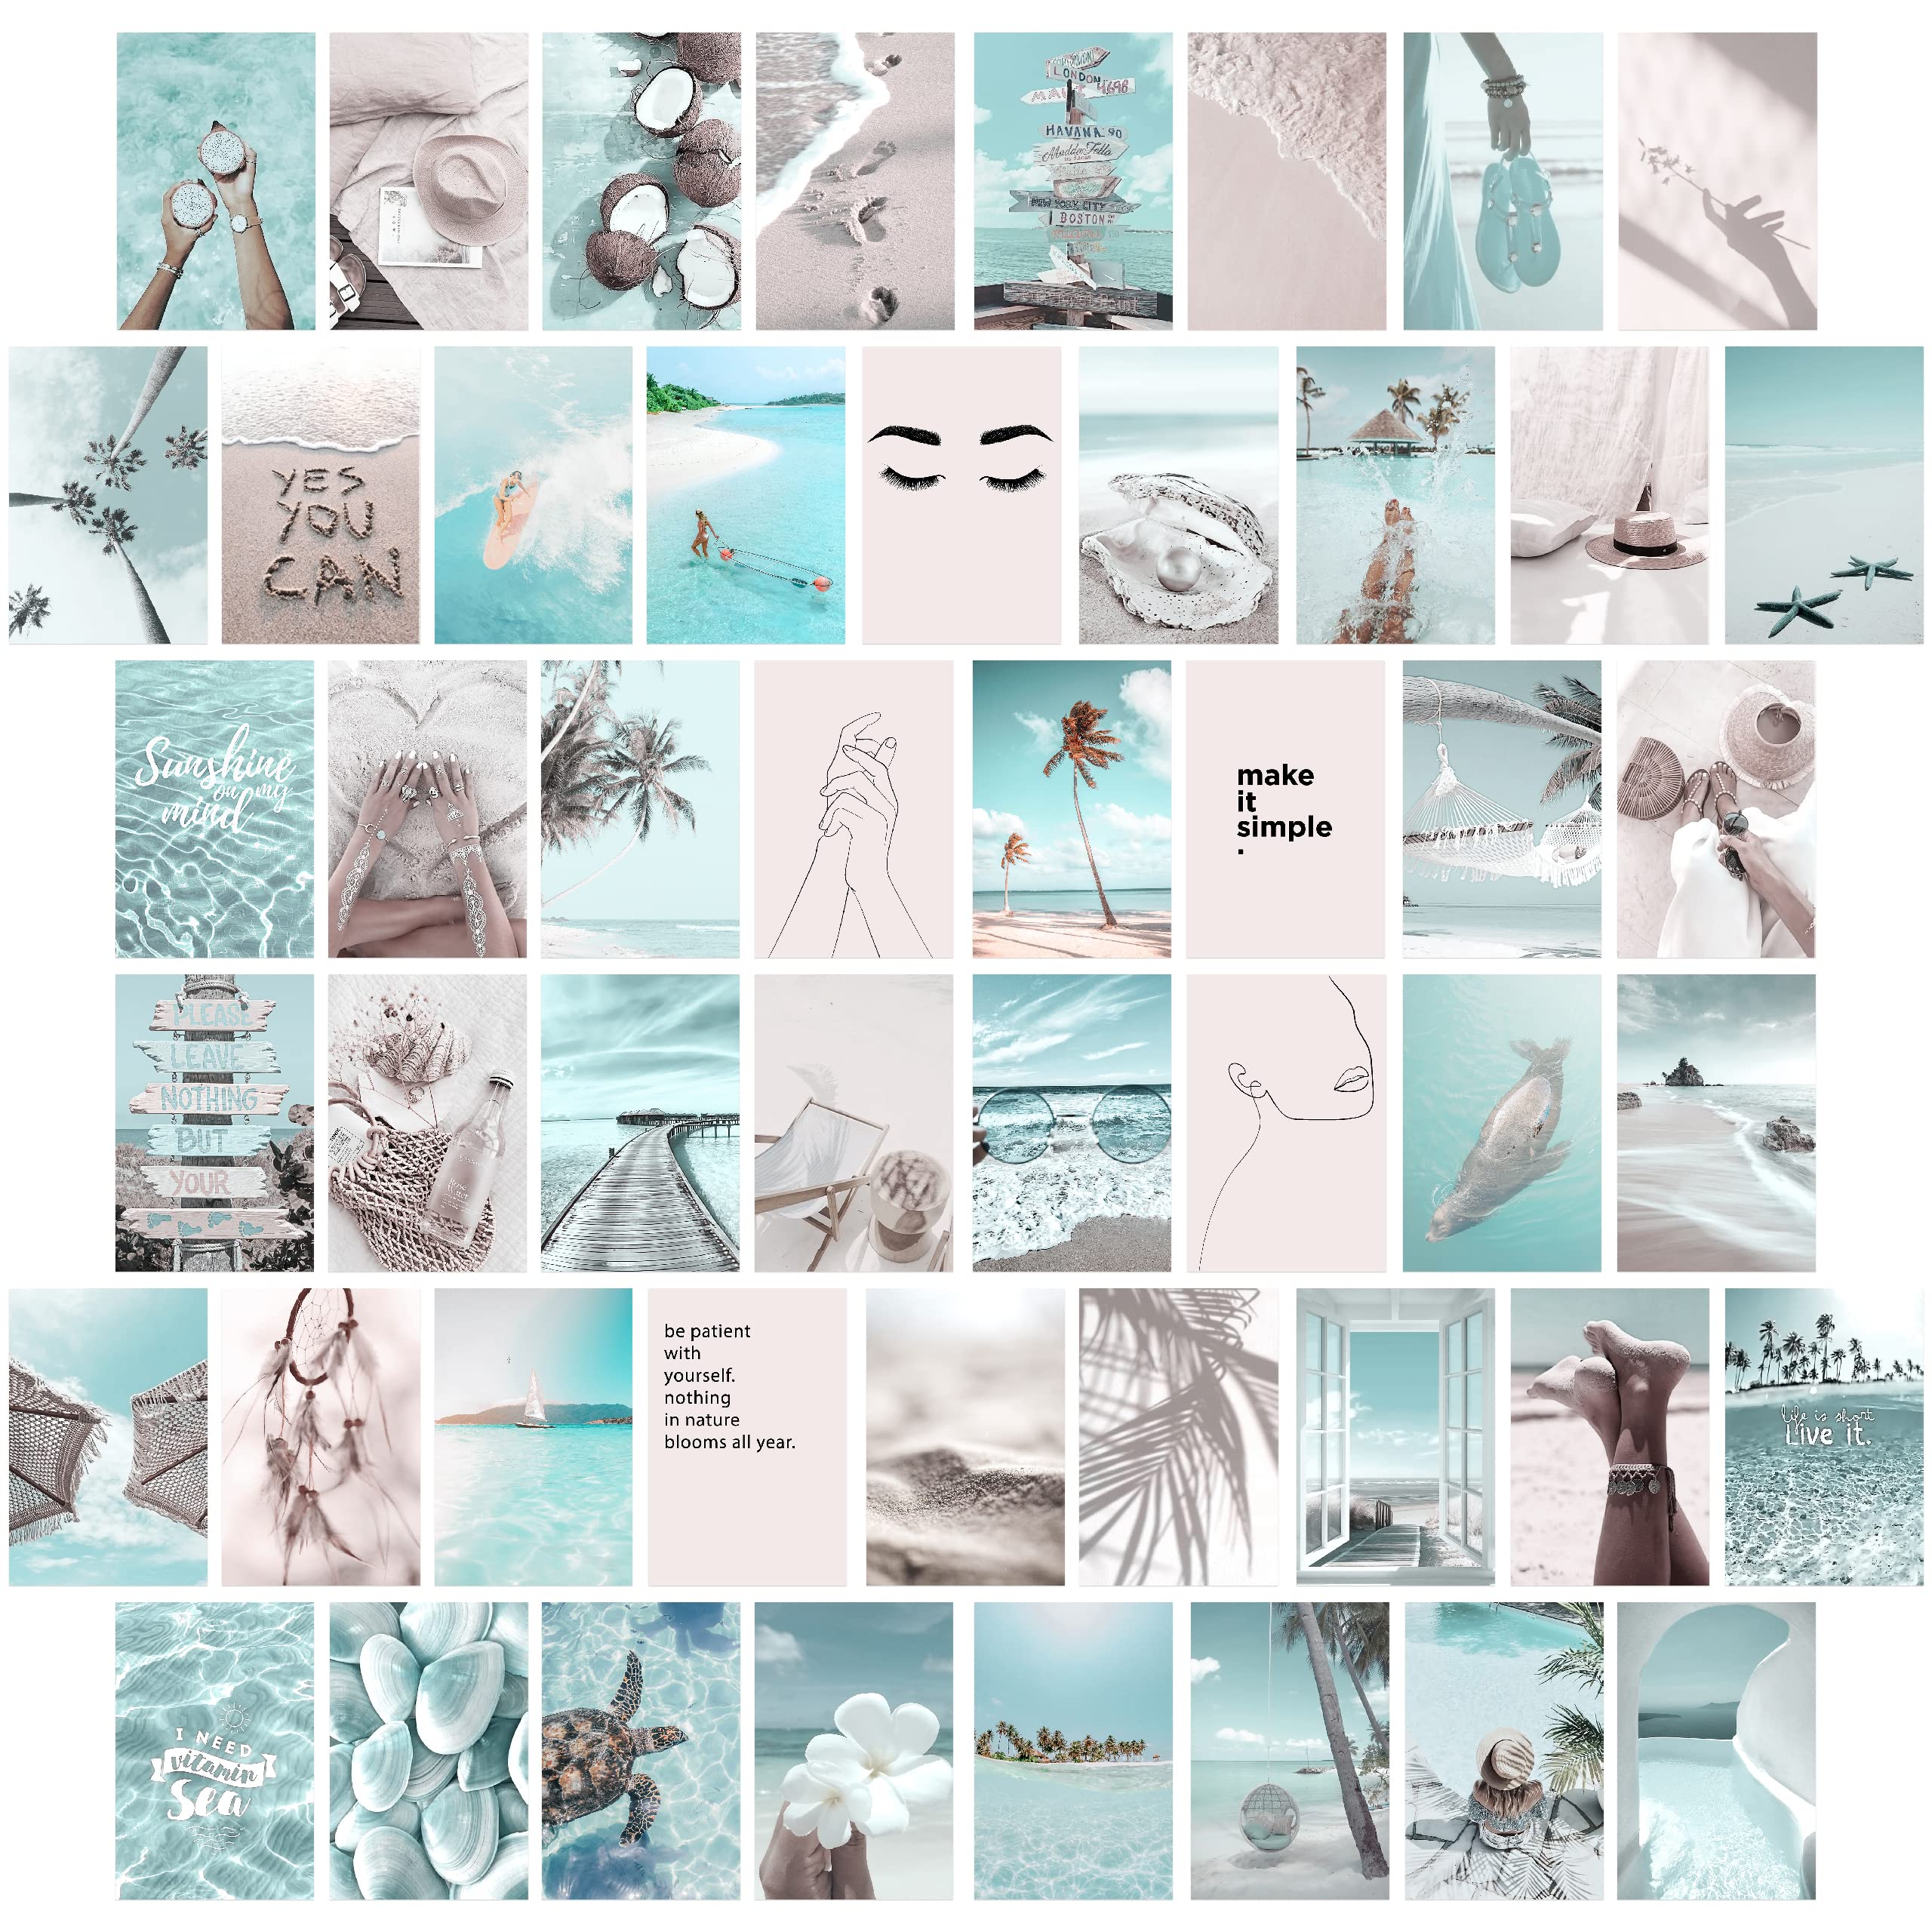 KONGSY Boho Beach Photo Wall Collage Kit Aesthetic Picture, Cyan Room Decor for Teen Girls, Trendy Summer Aesthetic VSCO Decoration Small Posters (50 Set 4x6 inch): Posters & Prints